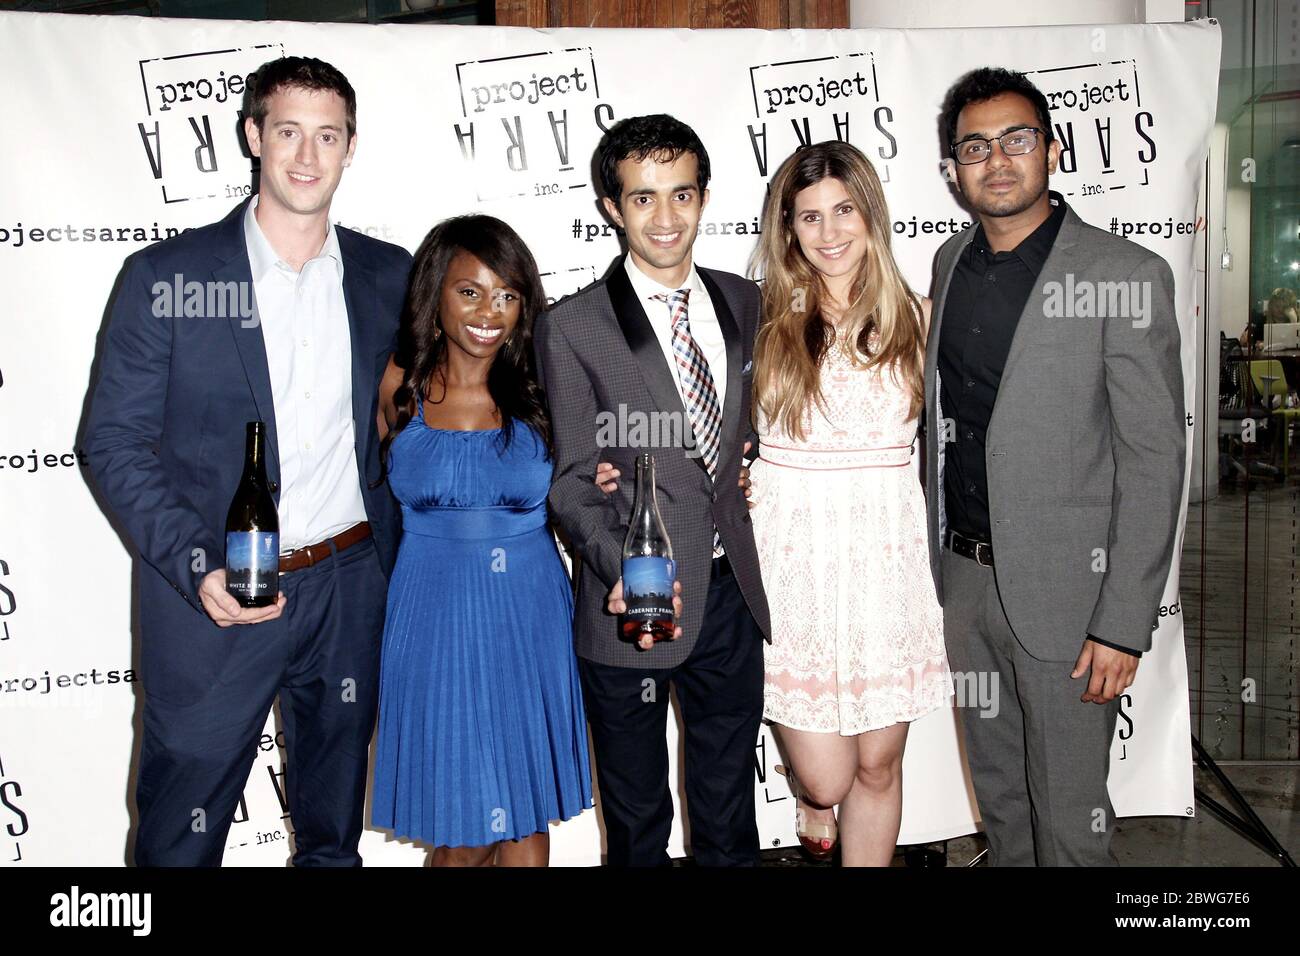 New York, NY, USA. 11 June, 2015. Devin Shoemaker, Founder of Rooftop Reds, the world's first commercially viable urban rooftop vineyard, Co-host of VH1's morning show 'The Gossip Table', Delaina Dixon, Project Sara Inc. Co-Founder, Viraj Borkar, Associate Producer at NBC Universal's Bravo TV, Chanel Omari, Abhishek Khade at the Launch Of Dining Reconstructed: An Off Menu Experience at The Starrett Leigh Building. Credit: Steve Mack/Alamy Stock Photo